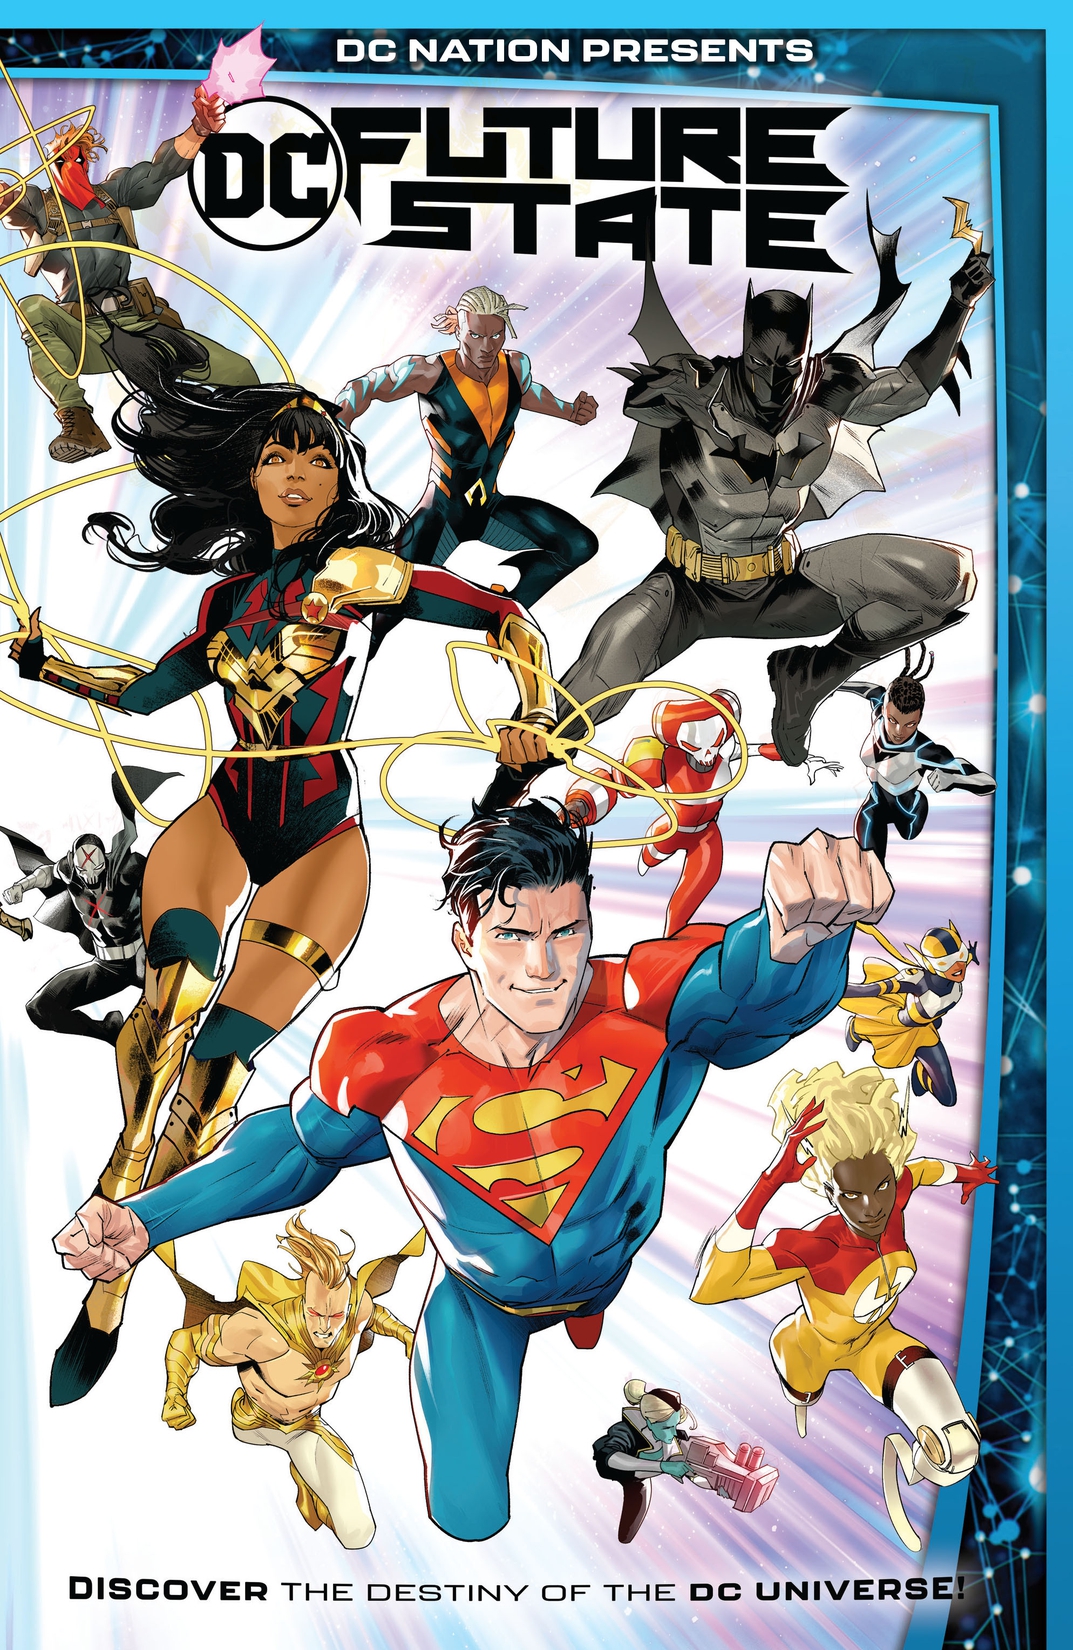 DC Nation Presents DC: Future State #1 preview images